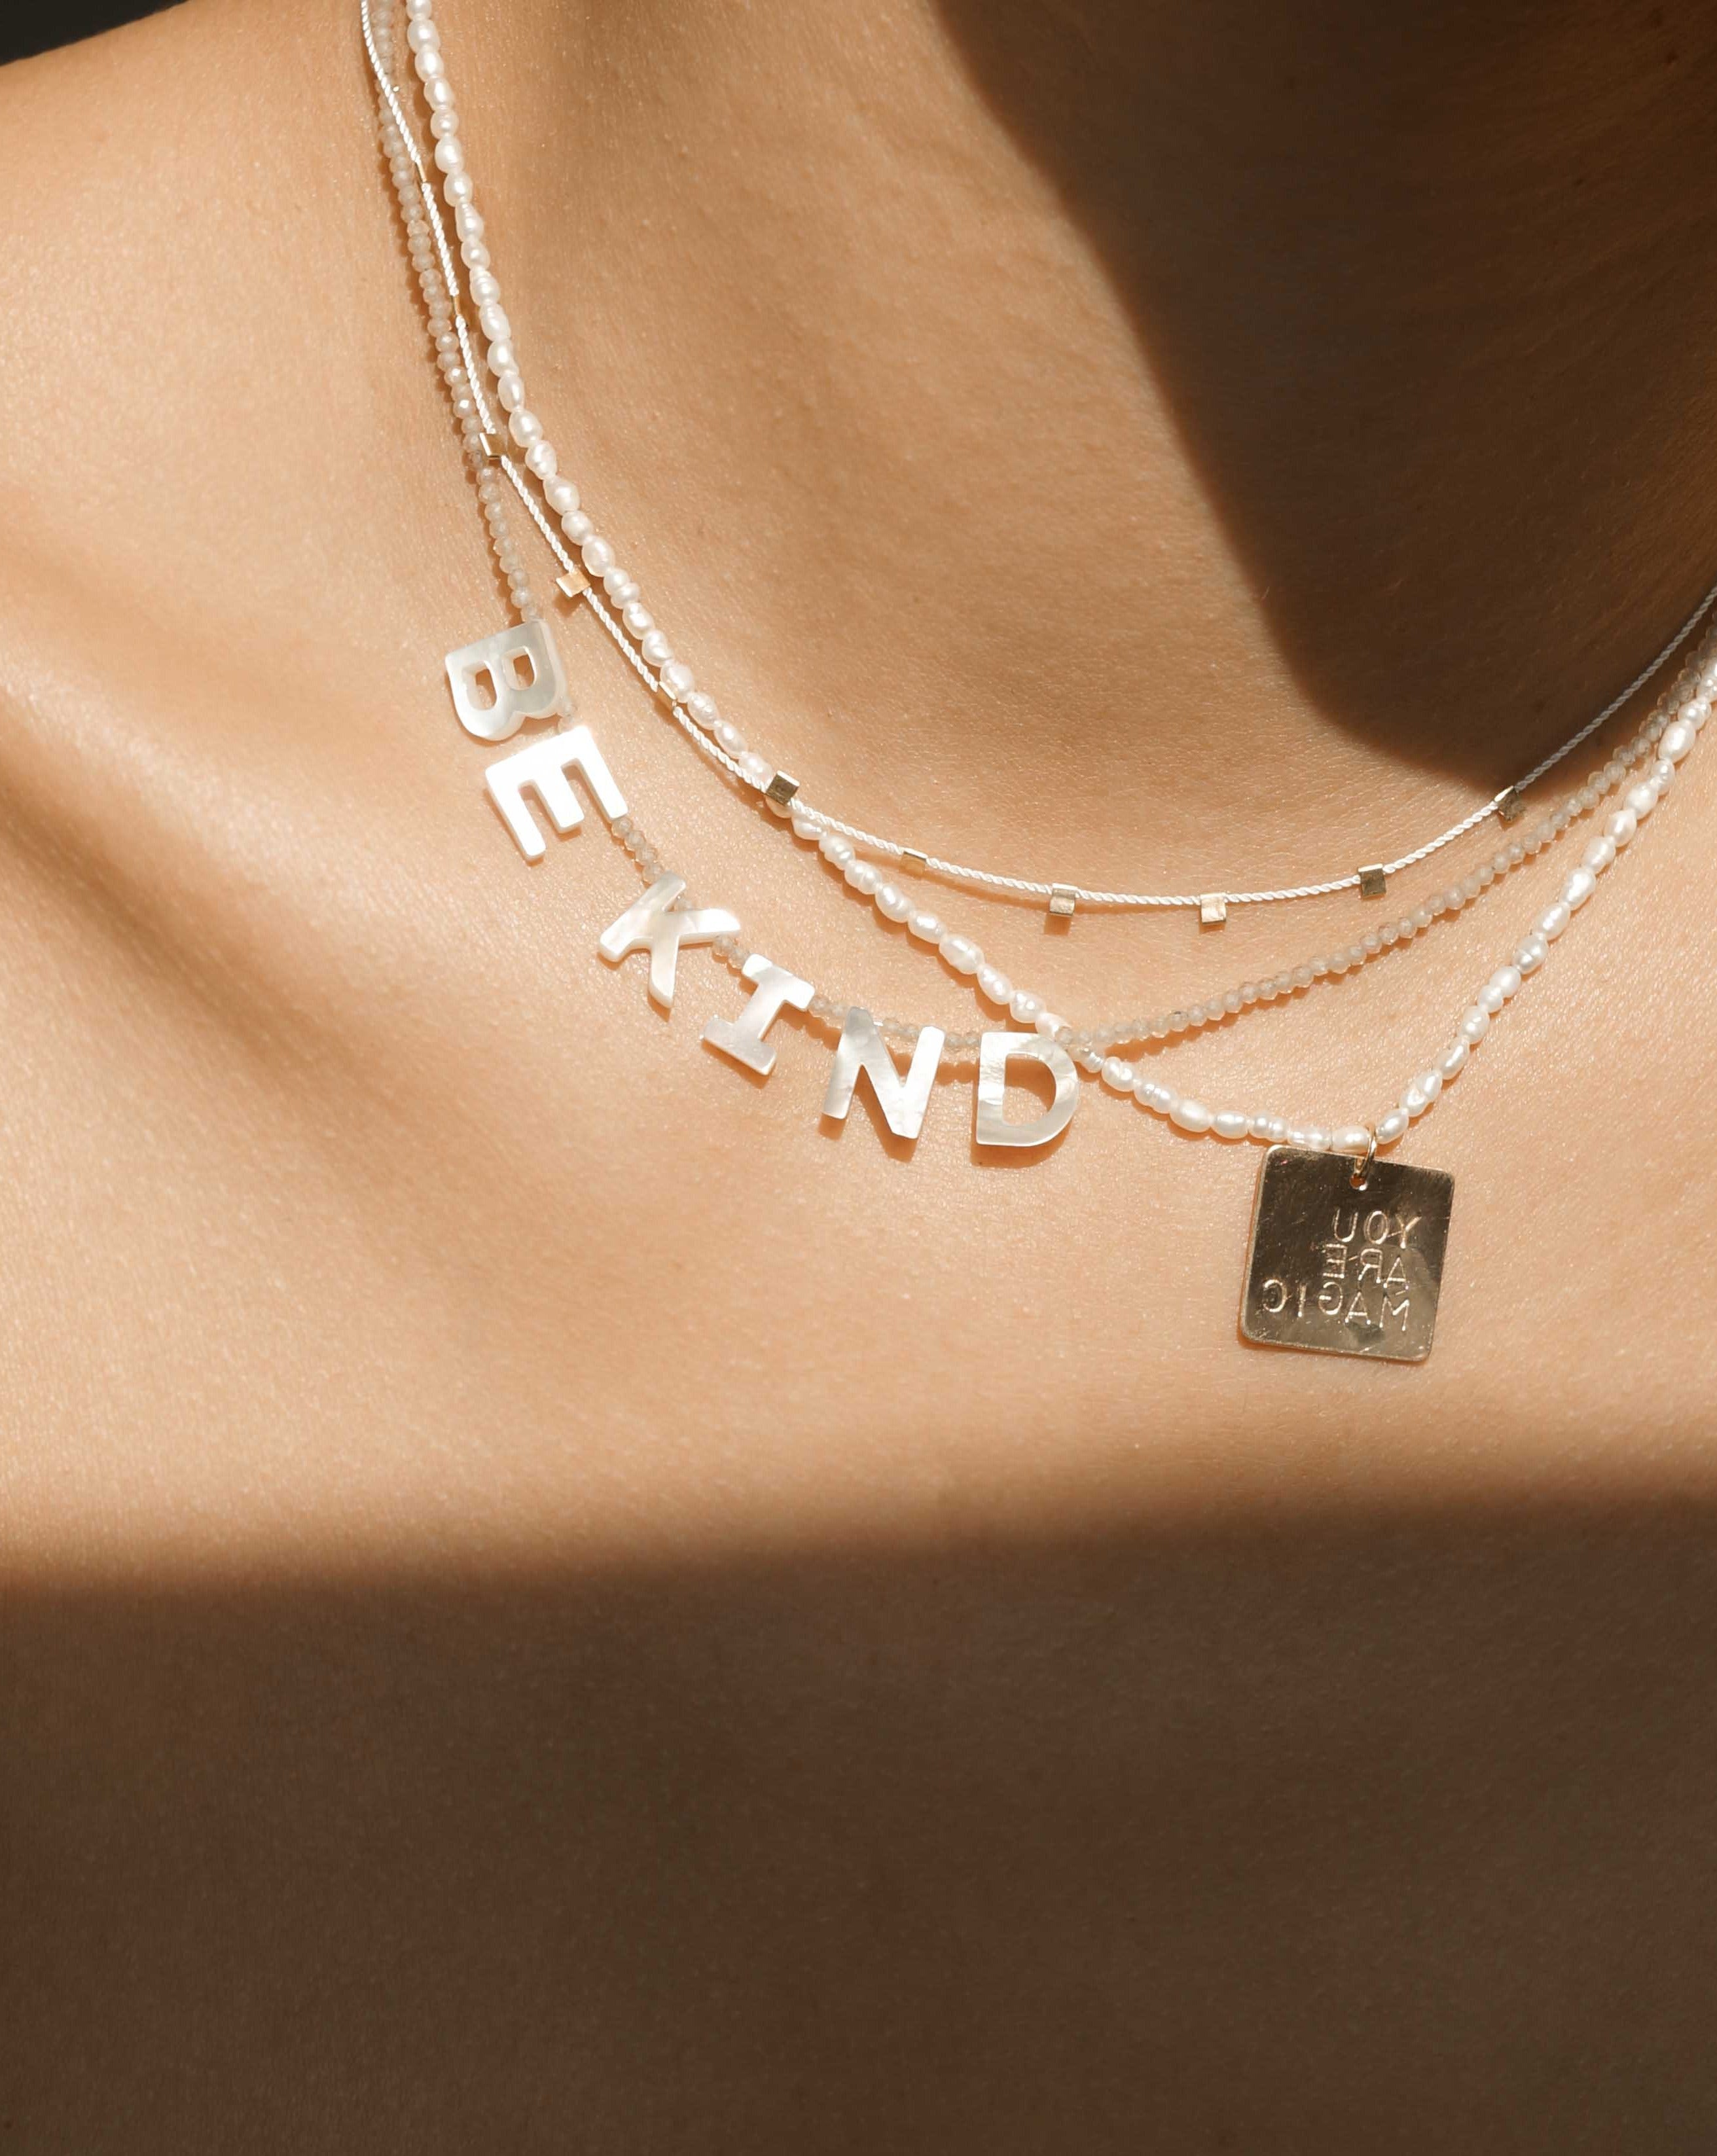 Kind Necklace by KOZAKH. A 16 to 18 inch adjustable length, faceted Zircon beads necklace, crafted with 14K Gold Filled, featuring hand carved Mother of Pearl letters spelling "BE KIND".